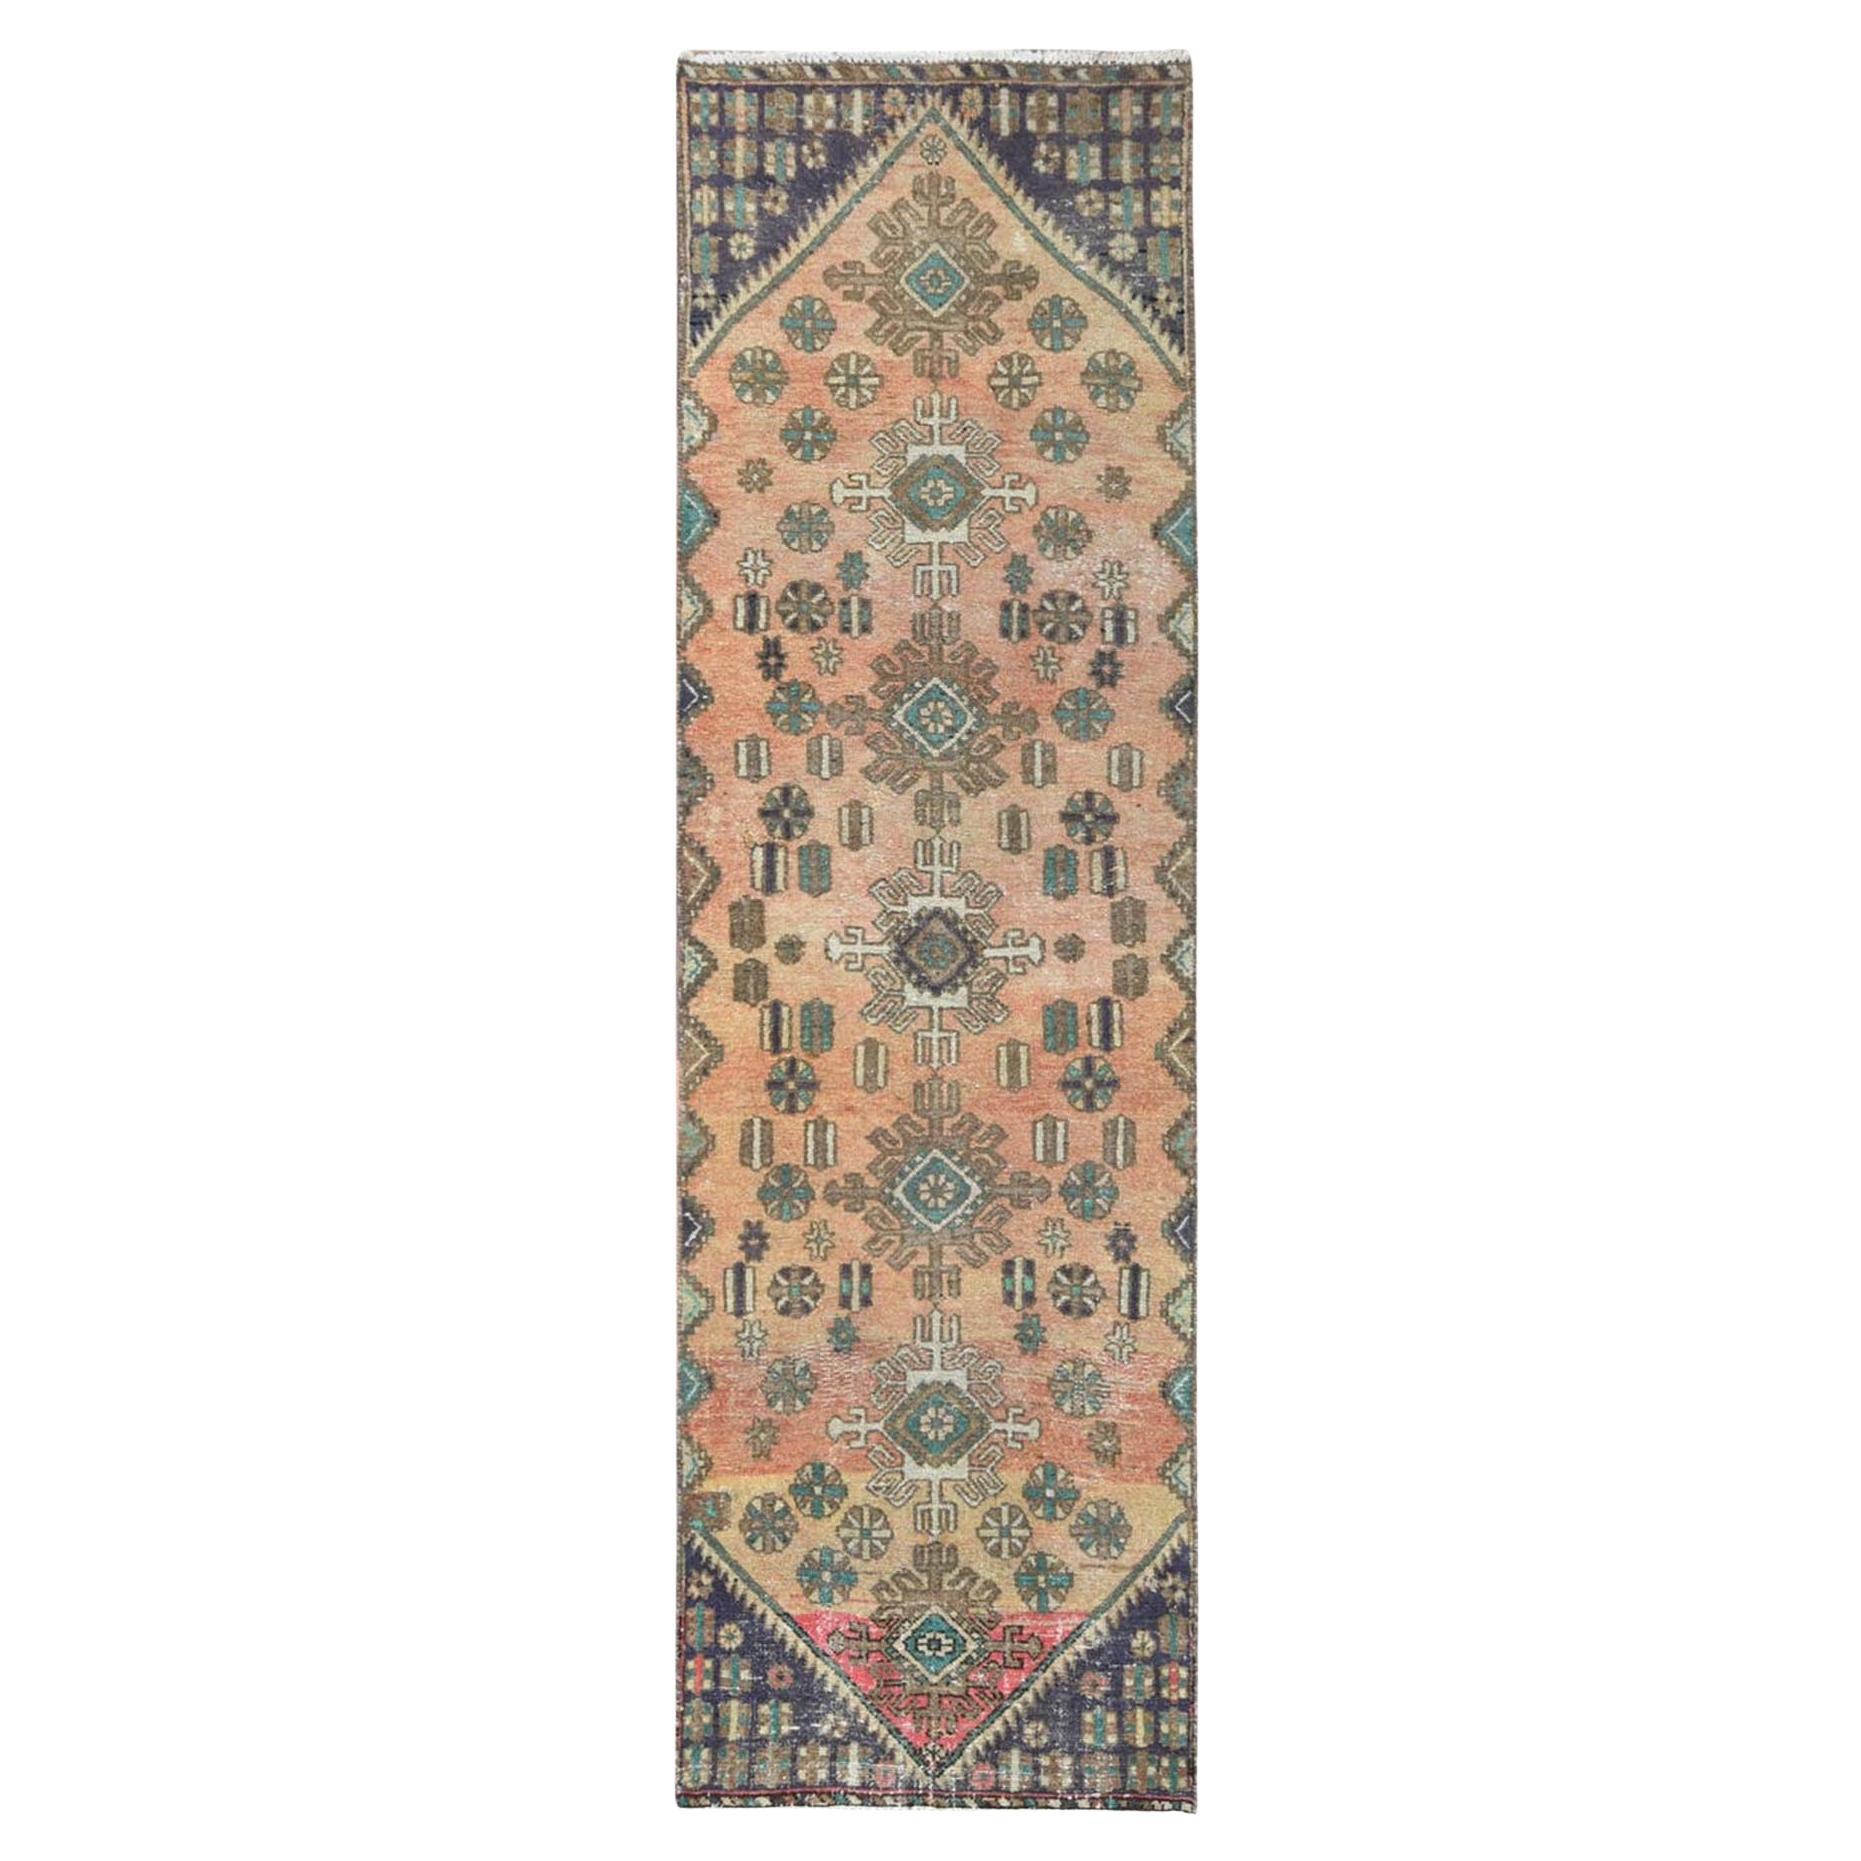 Sunset Colors, Distressed Worn Wool Hand Knotted, Vintage Persian Bakhtiar Rug